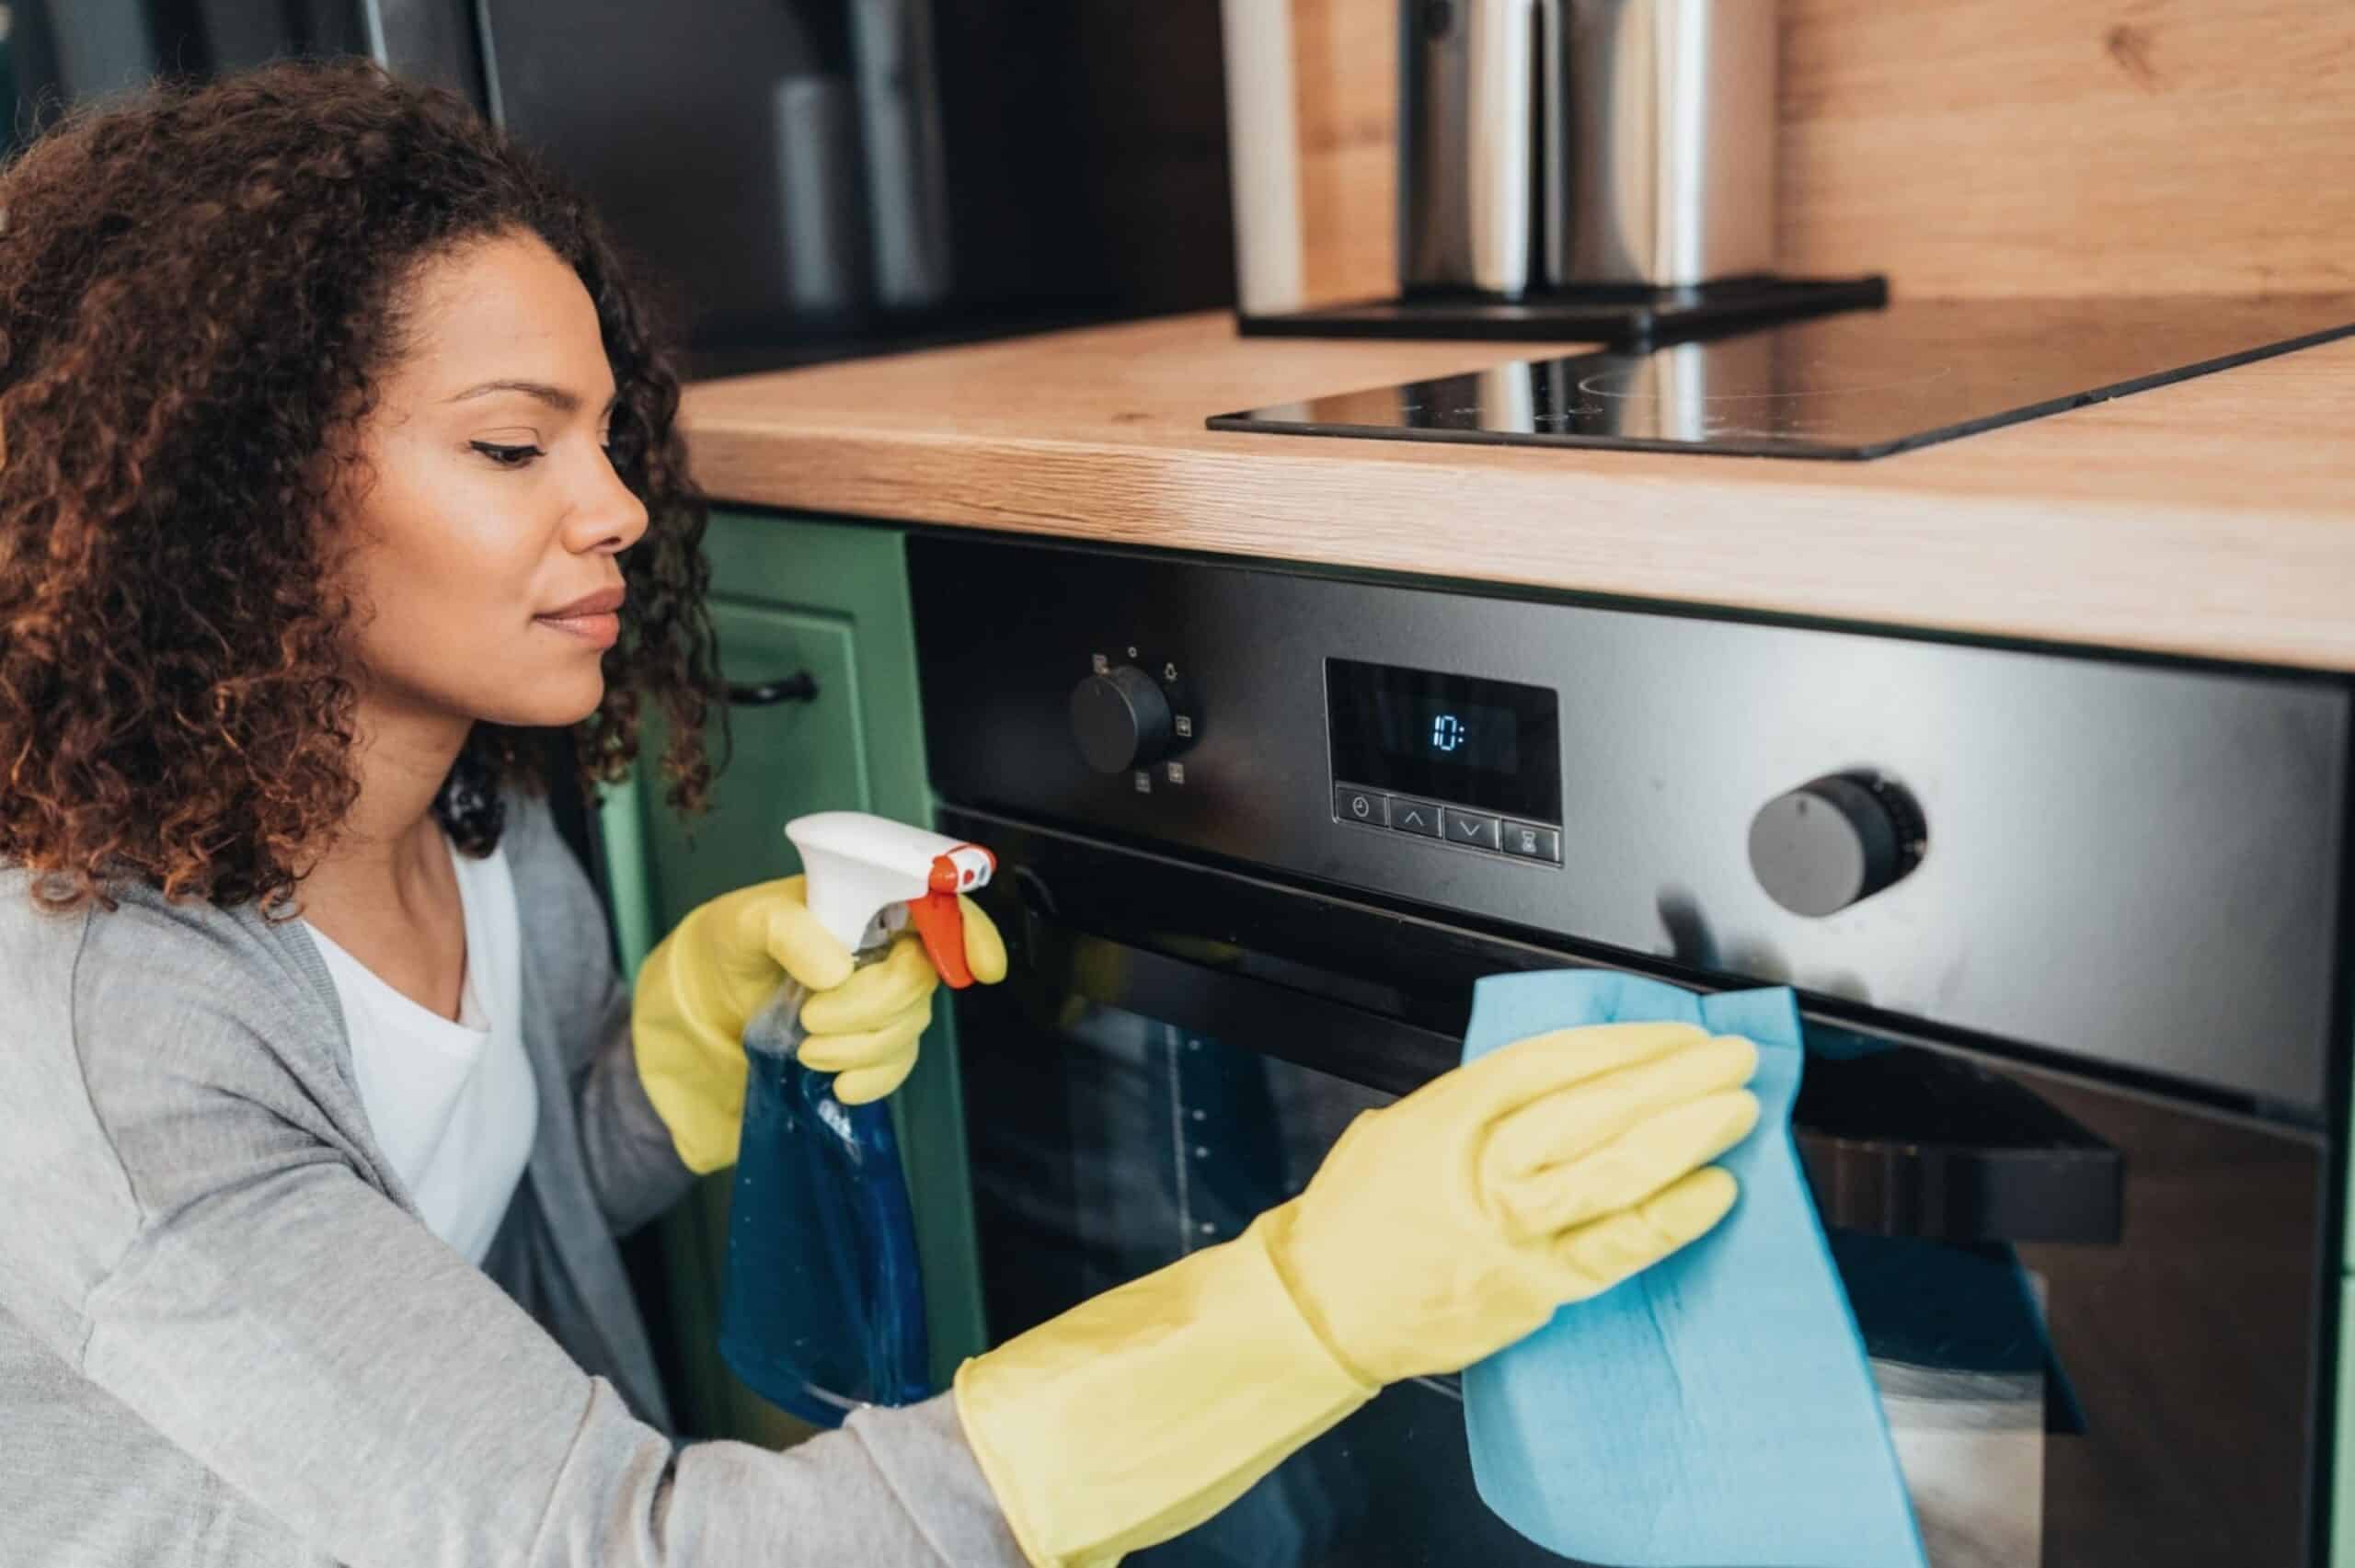 Woman cleaning with disinfectant and gloves at home